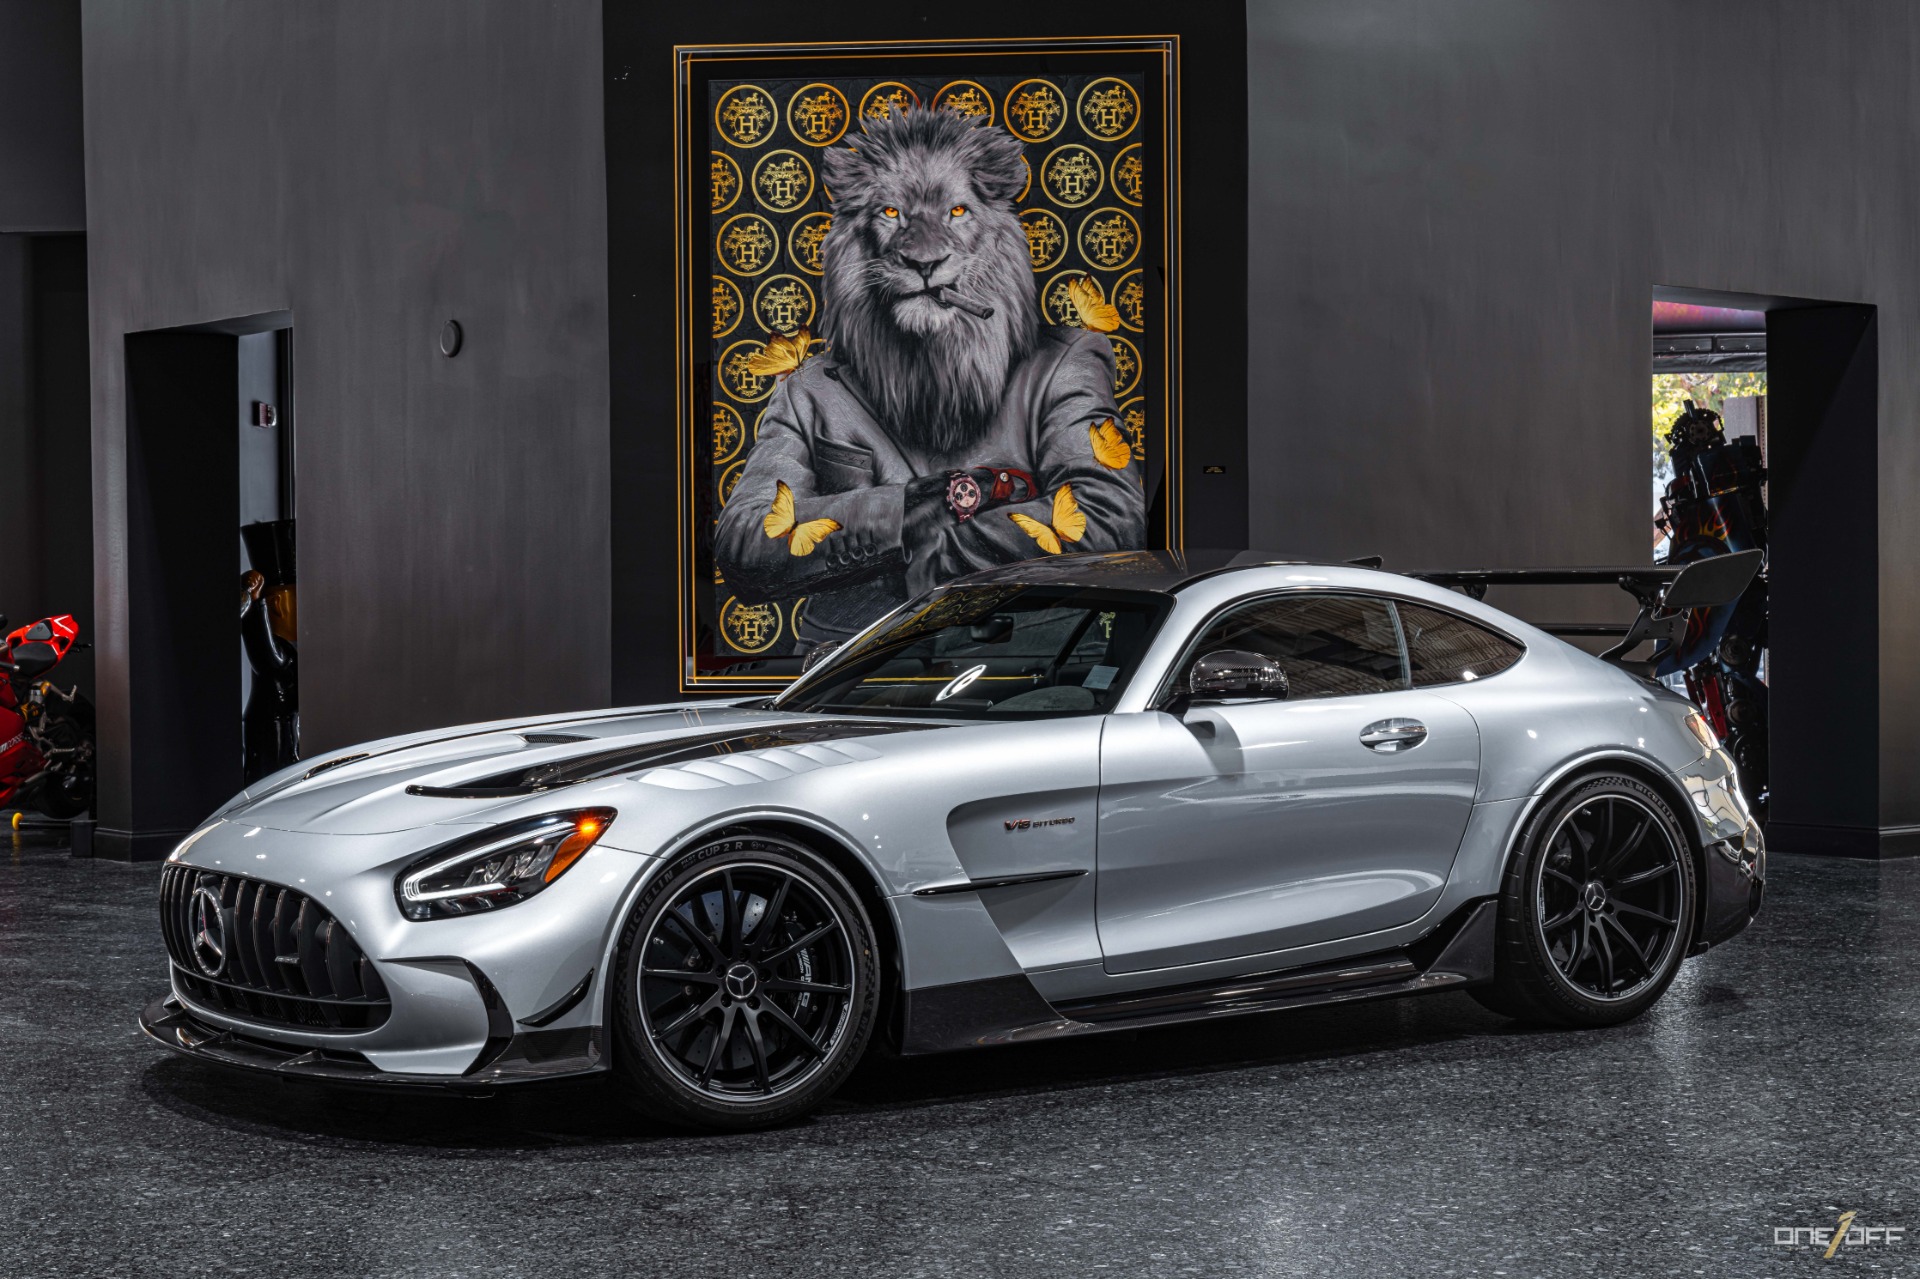 Used 2021 Mercedes-Benz AMG GT Black Series w/ Full PPF For Sale ($399,000)